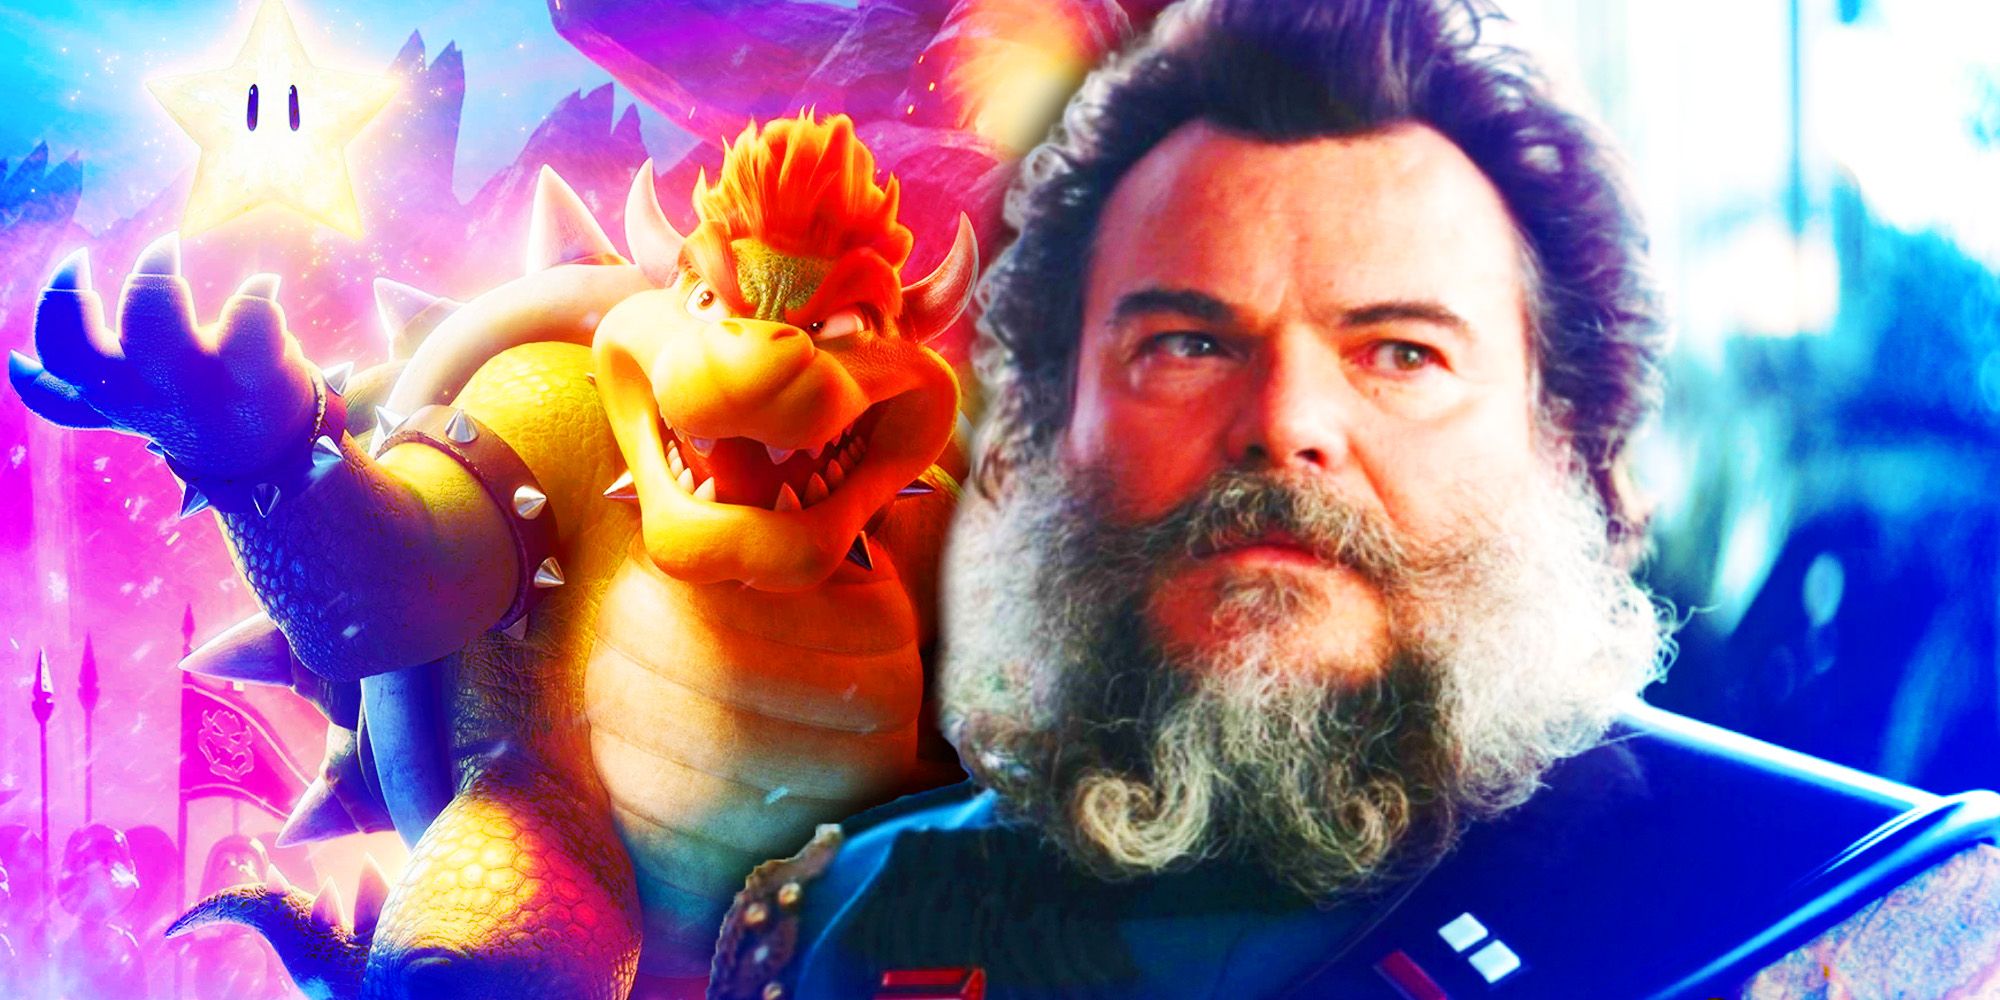 Jack Black with beard next to Bowser holding a star in The Super Mario Bros. Movie